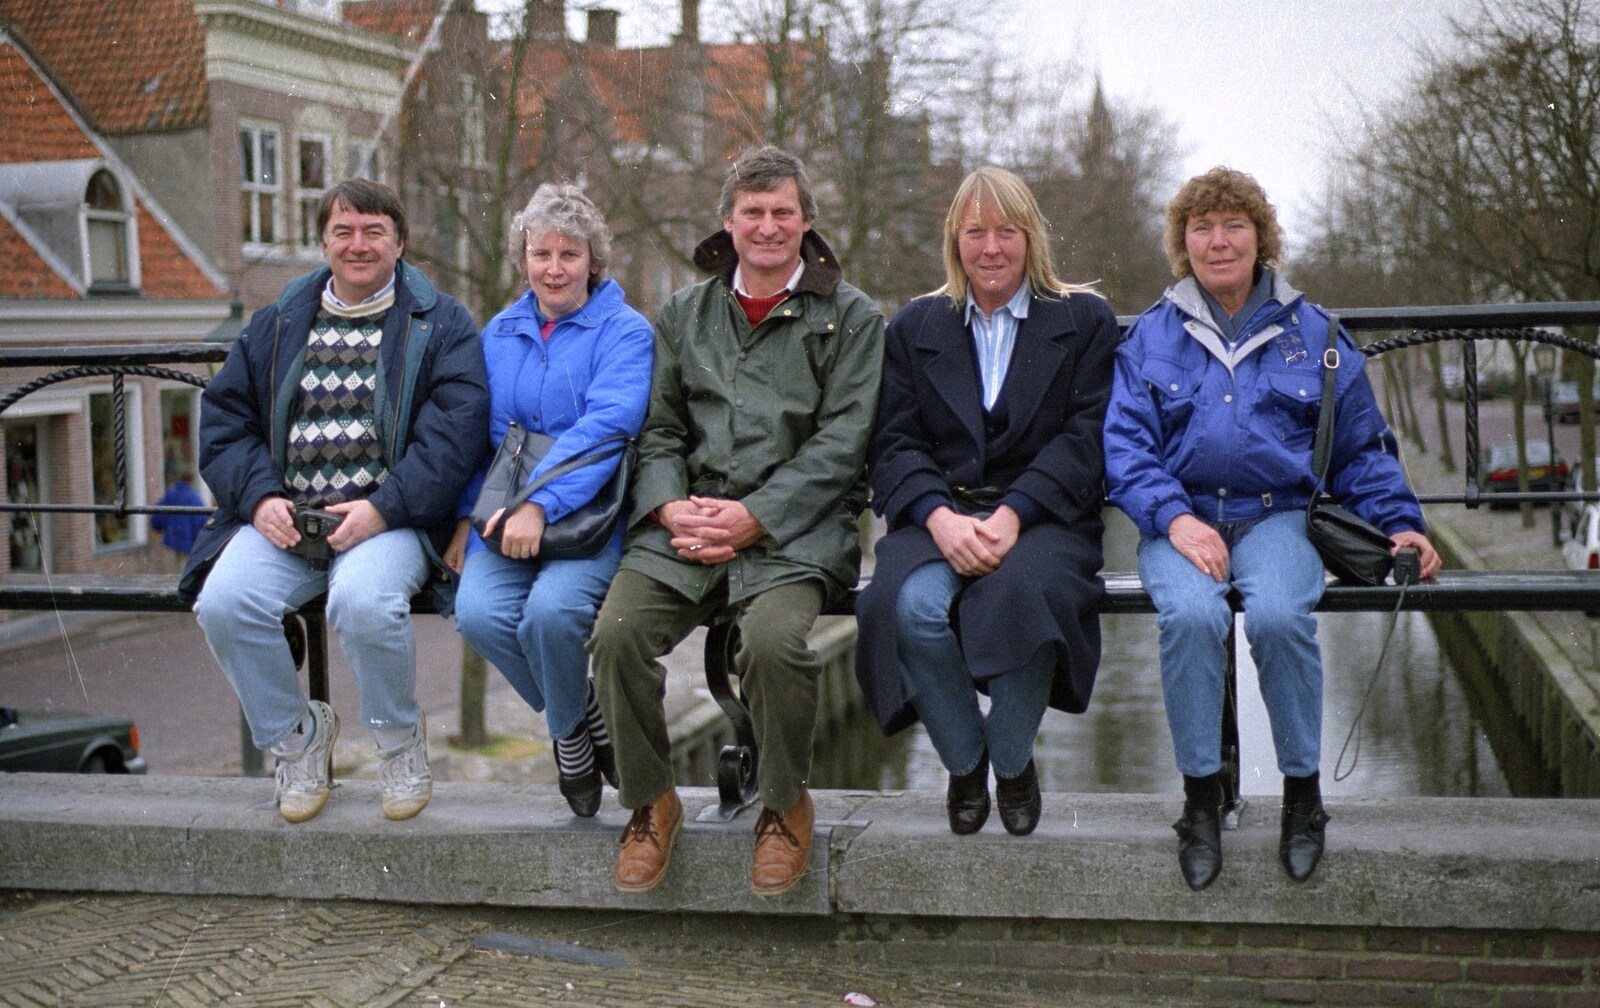 Out and About in Amsterdam, Hoorne, Vollendam and Edam, The Netherlands - 26th March 1992: The gang on a bridge